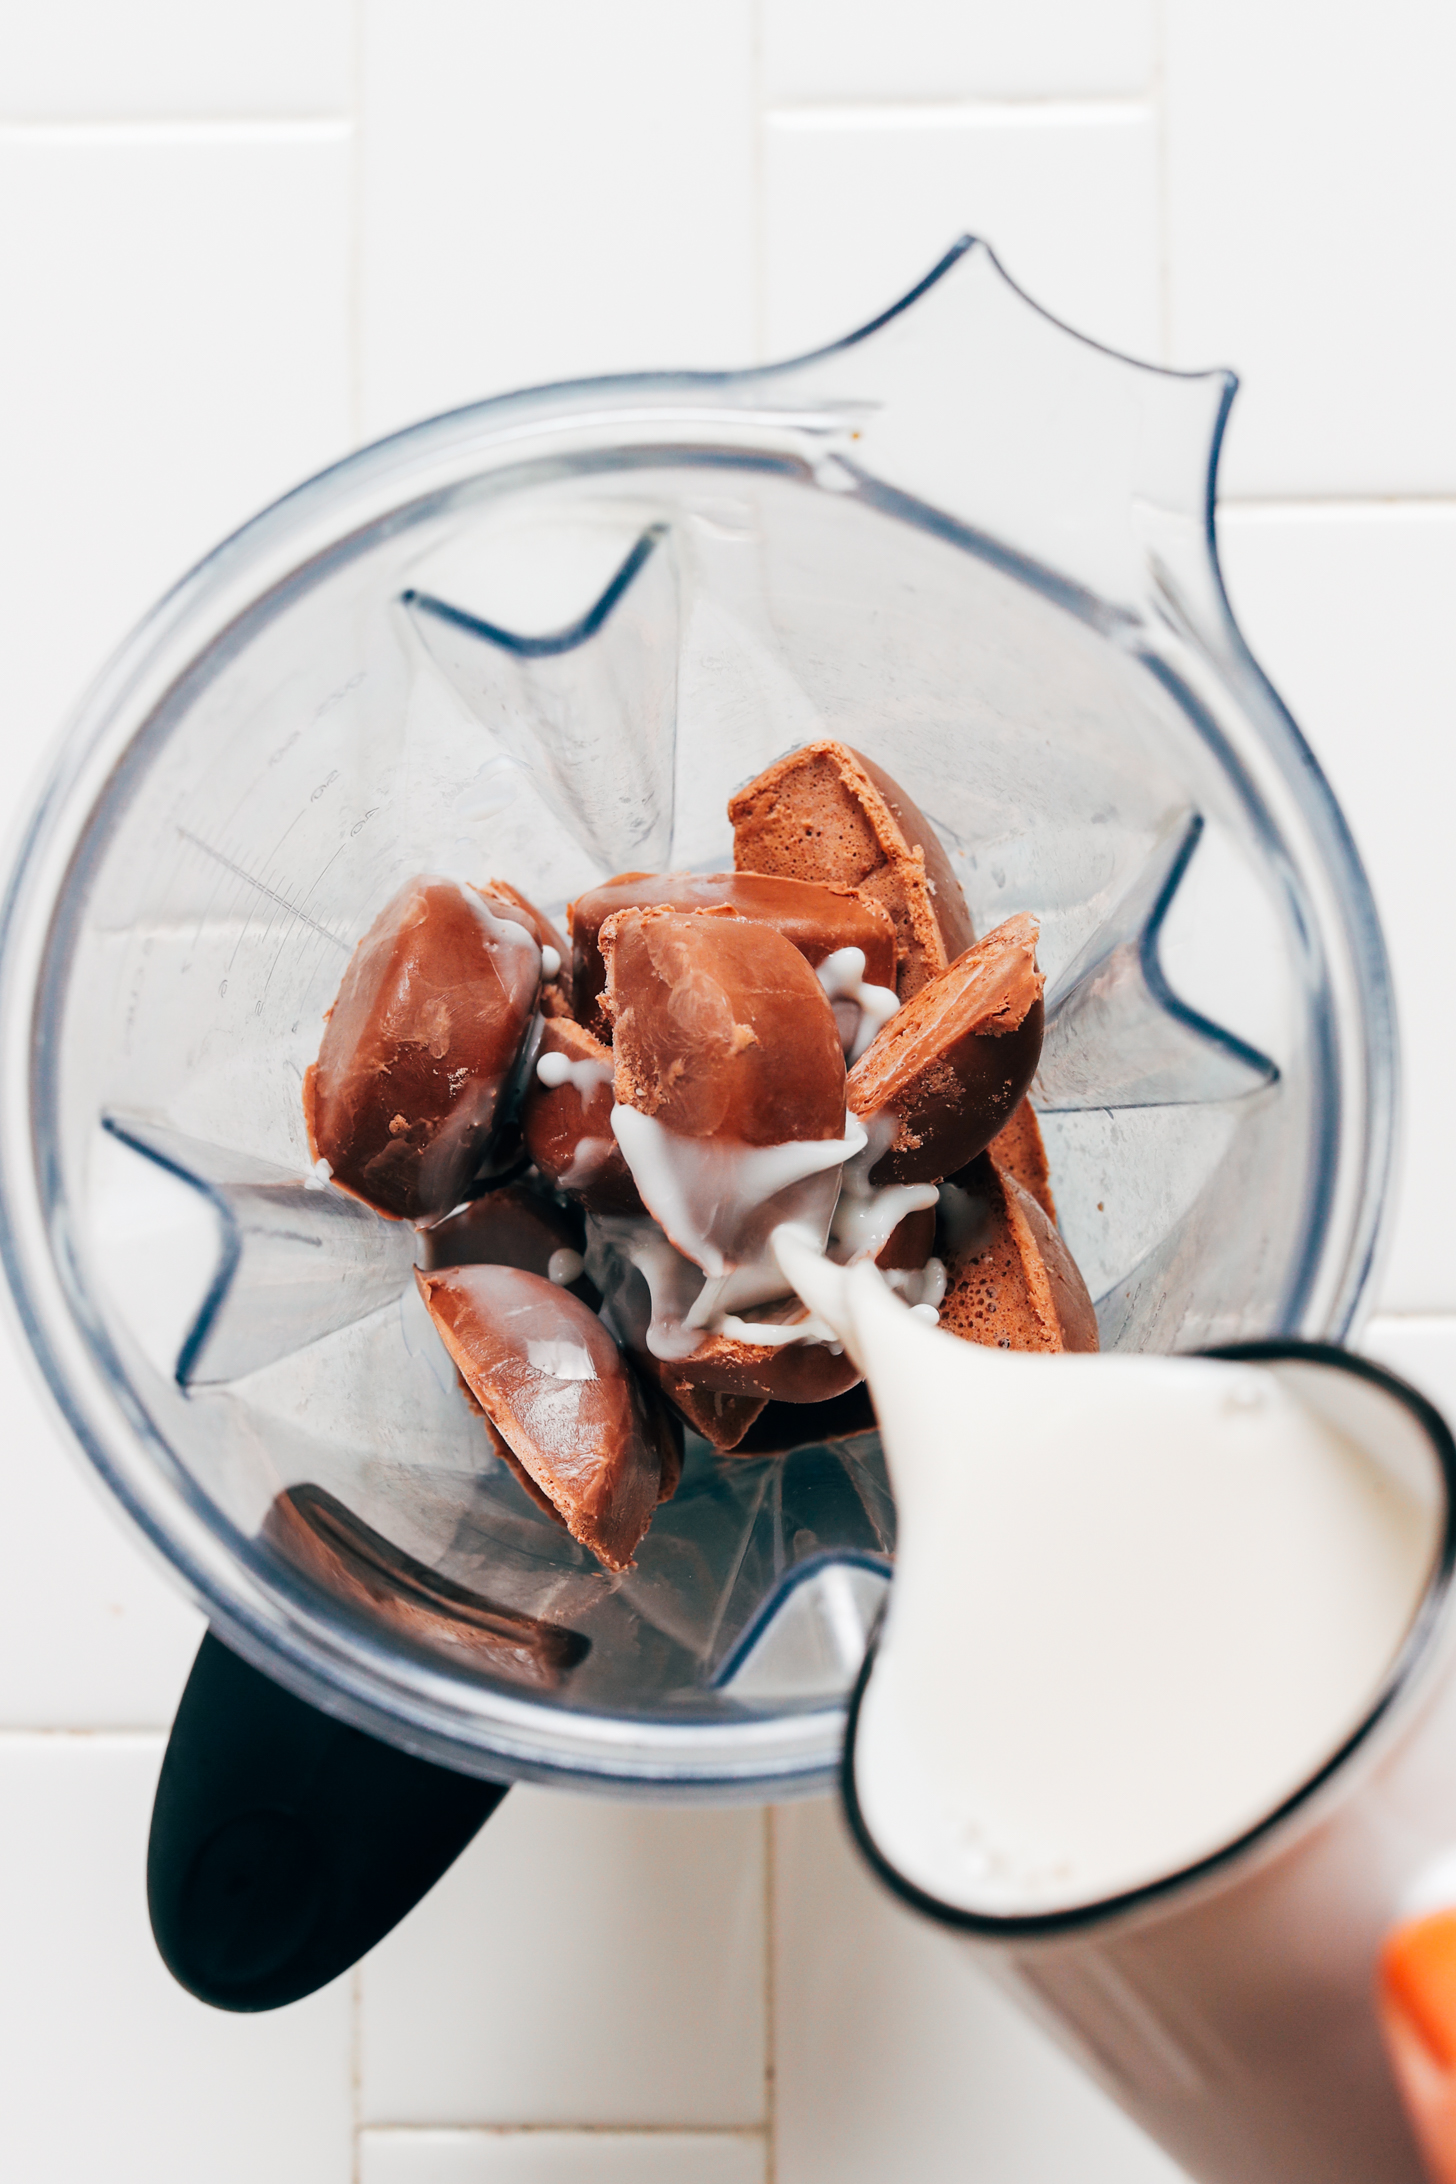 Pouring almond milk over chocolate milk ice cubes in a Vitamix blender